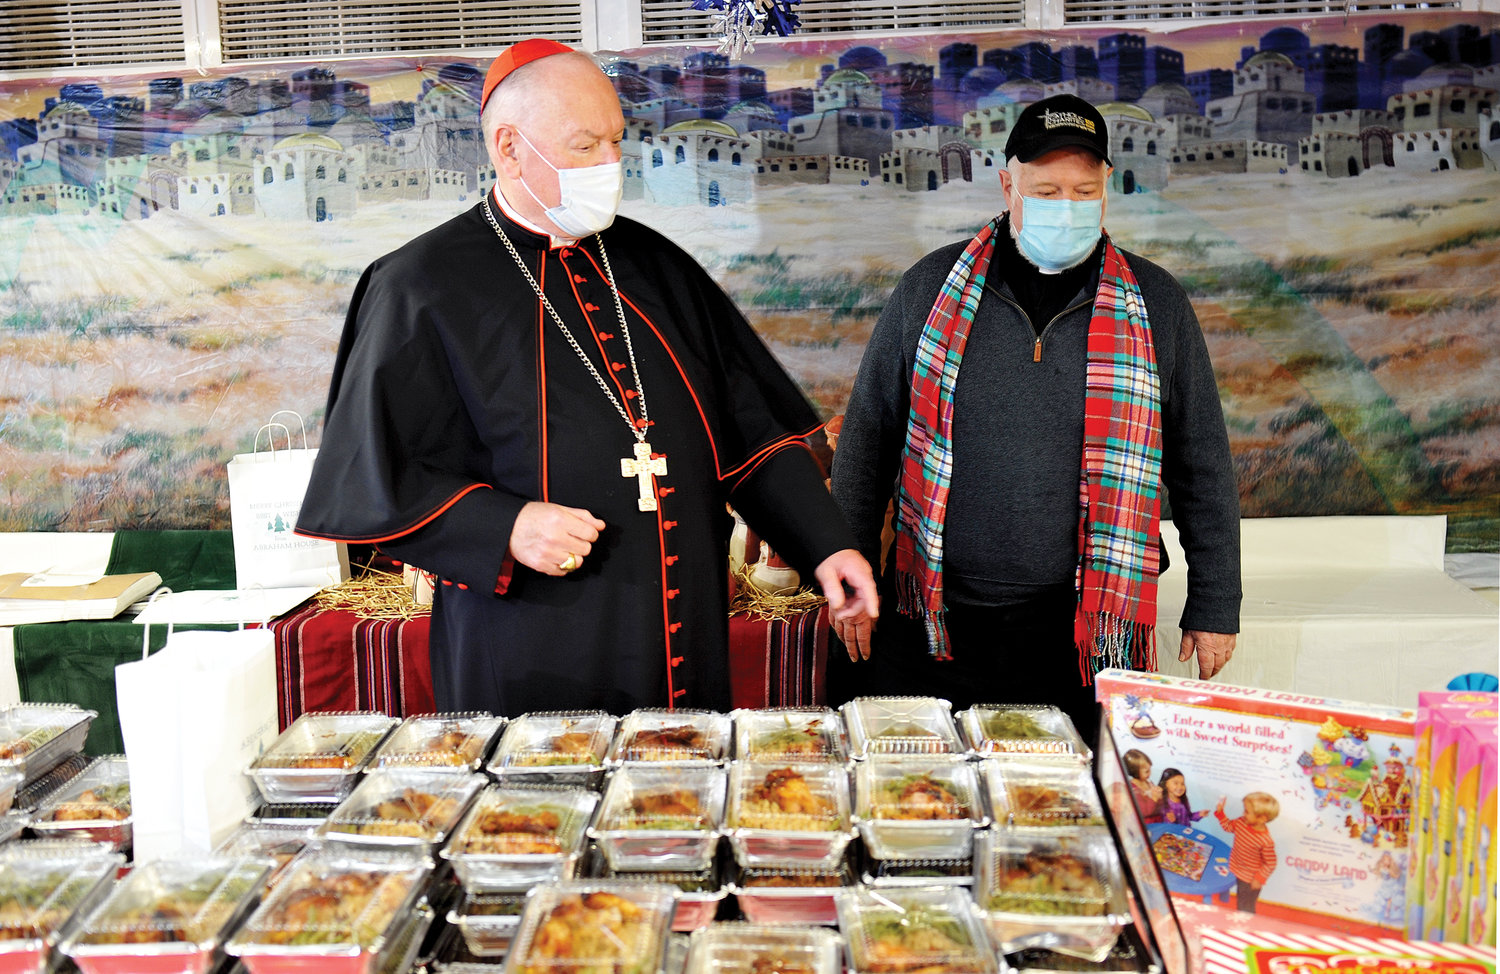 At Abraham House Dec. 22 in the Mott Haven section of the Bronx, Cardinal Dolan and Msgr. Kevin Sullivan, executive director of archdiocesan Catholic Charities, stand near the food provided through Abraham House, an affiliate of Catholic Charities.